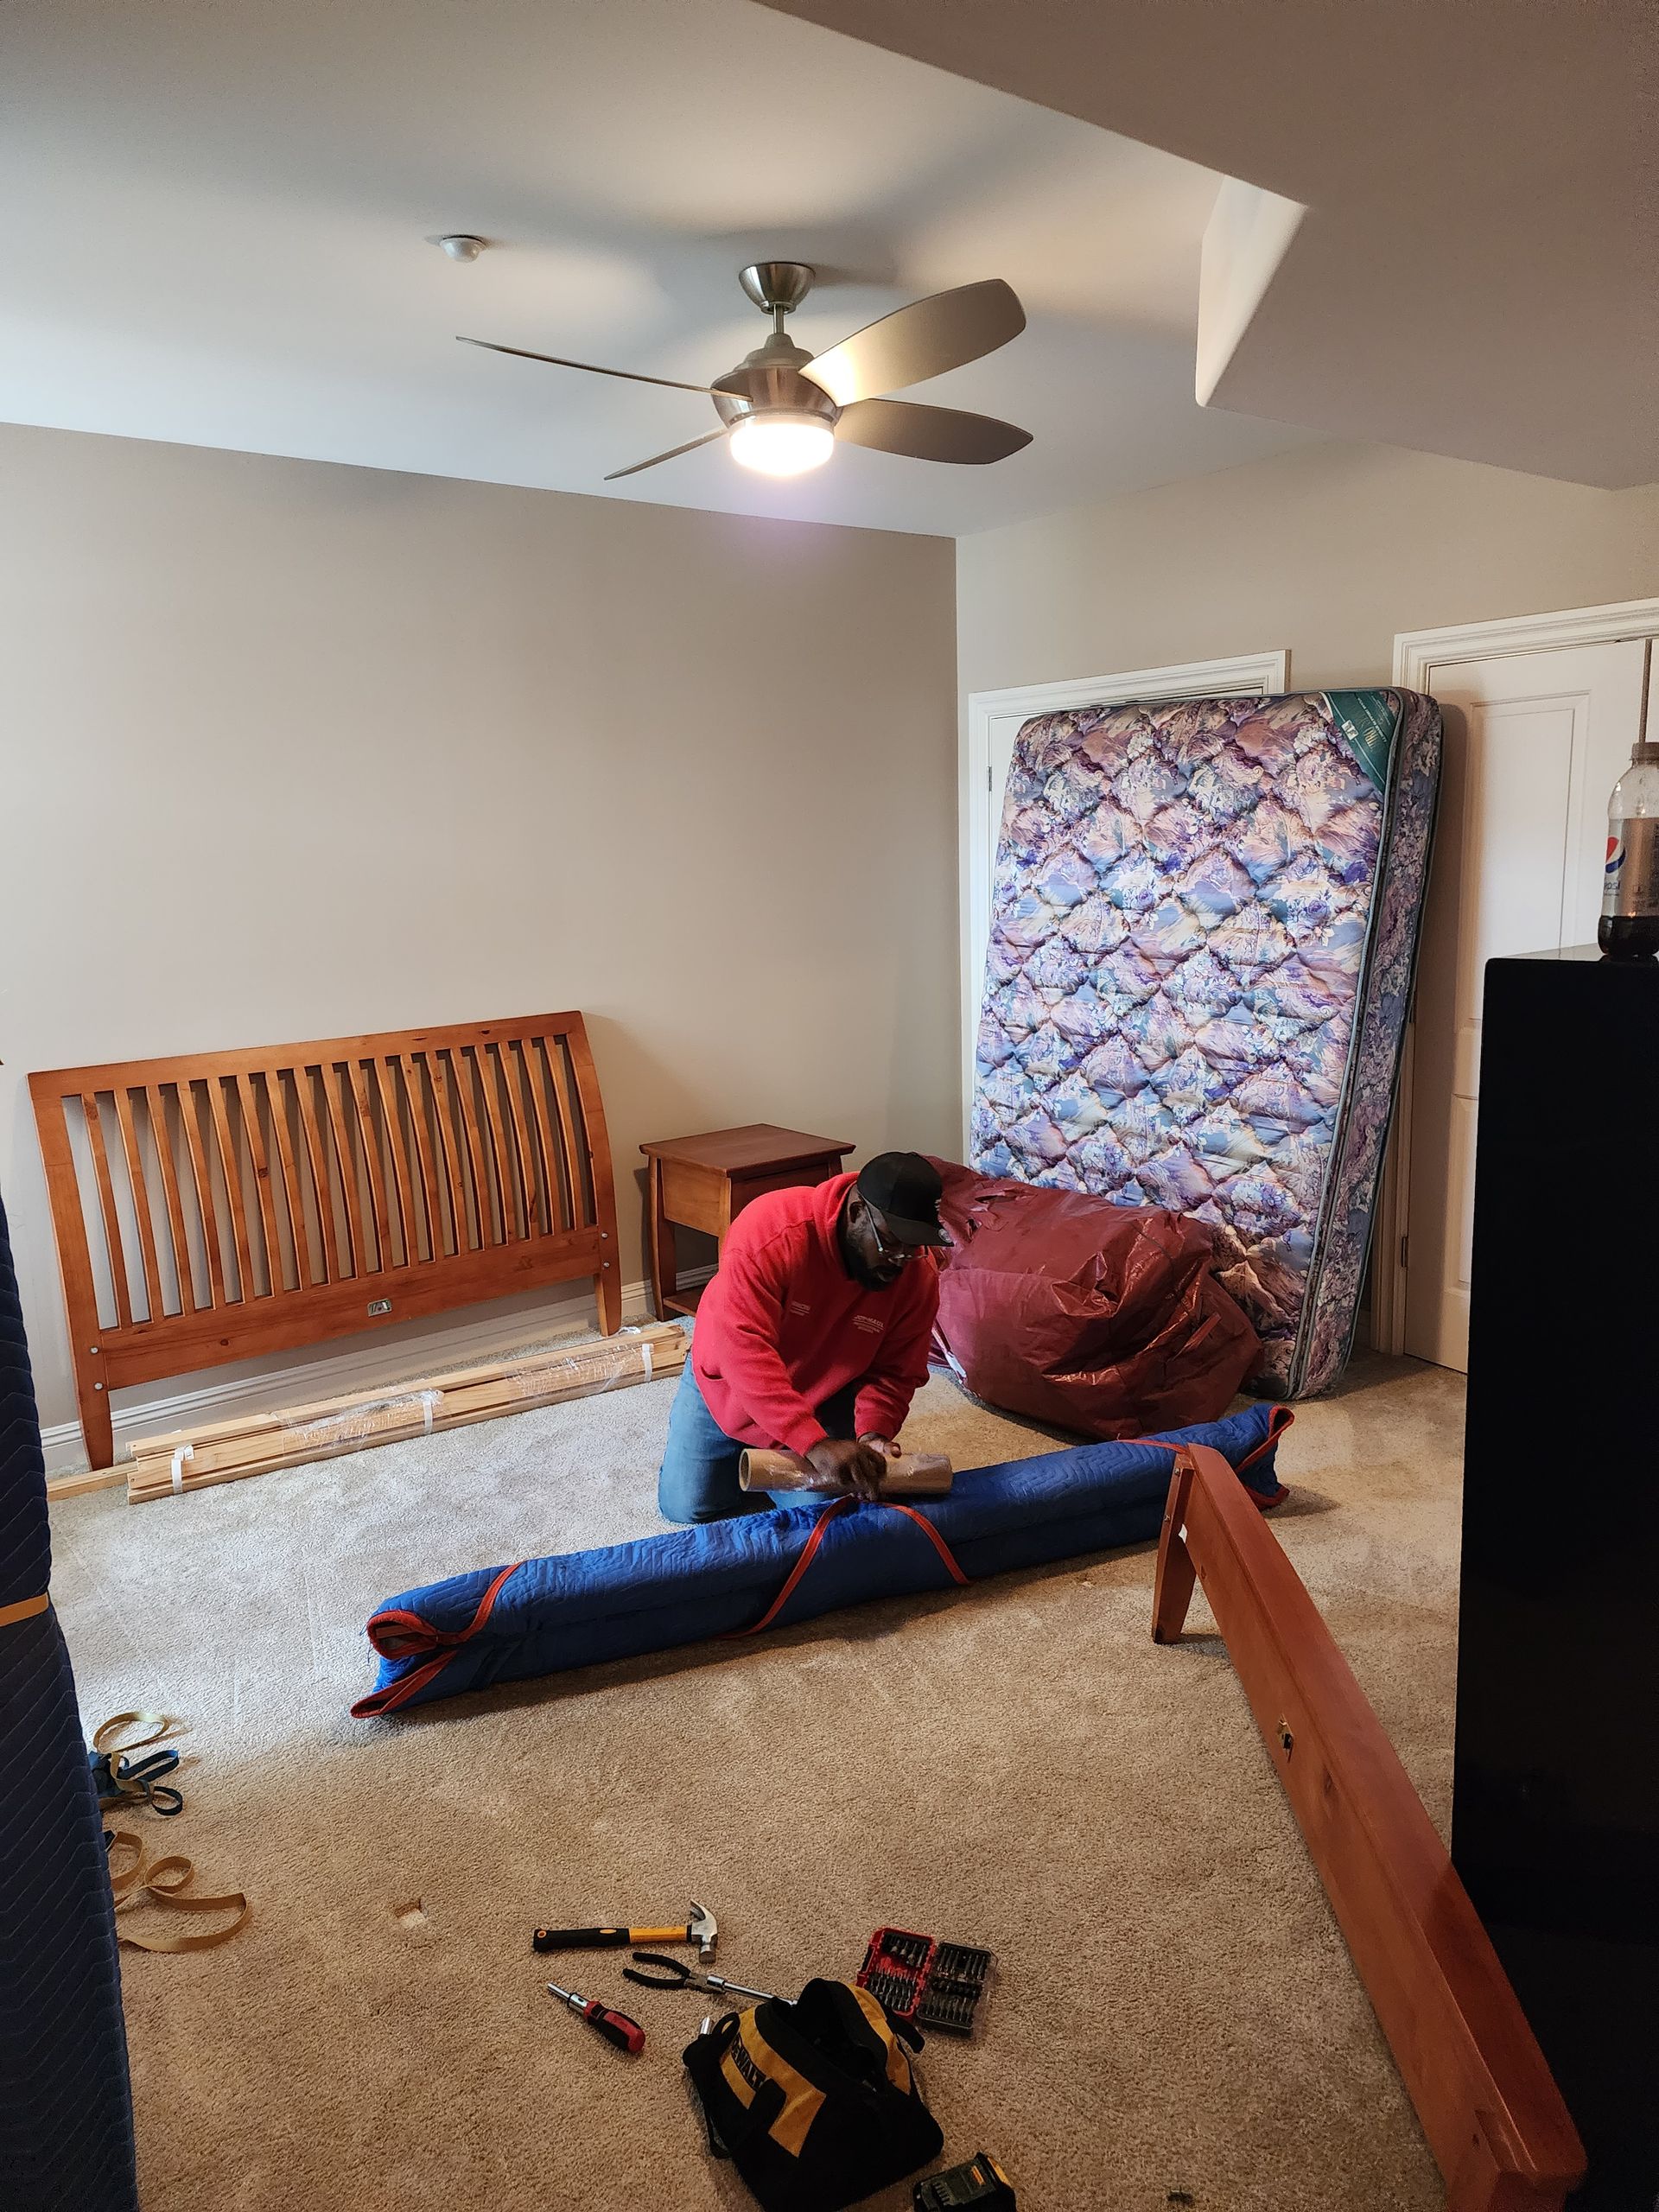 a man is kneeling down in a bedroom holding a mattress.